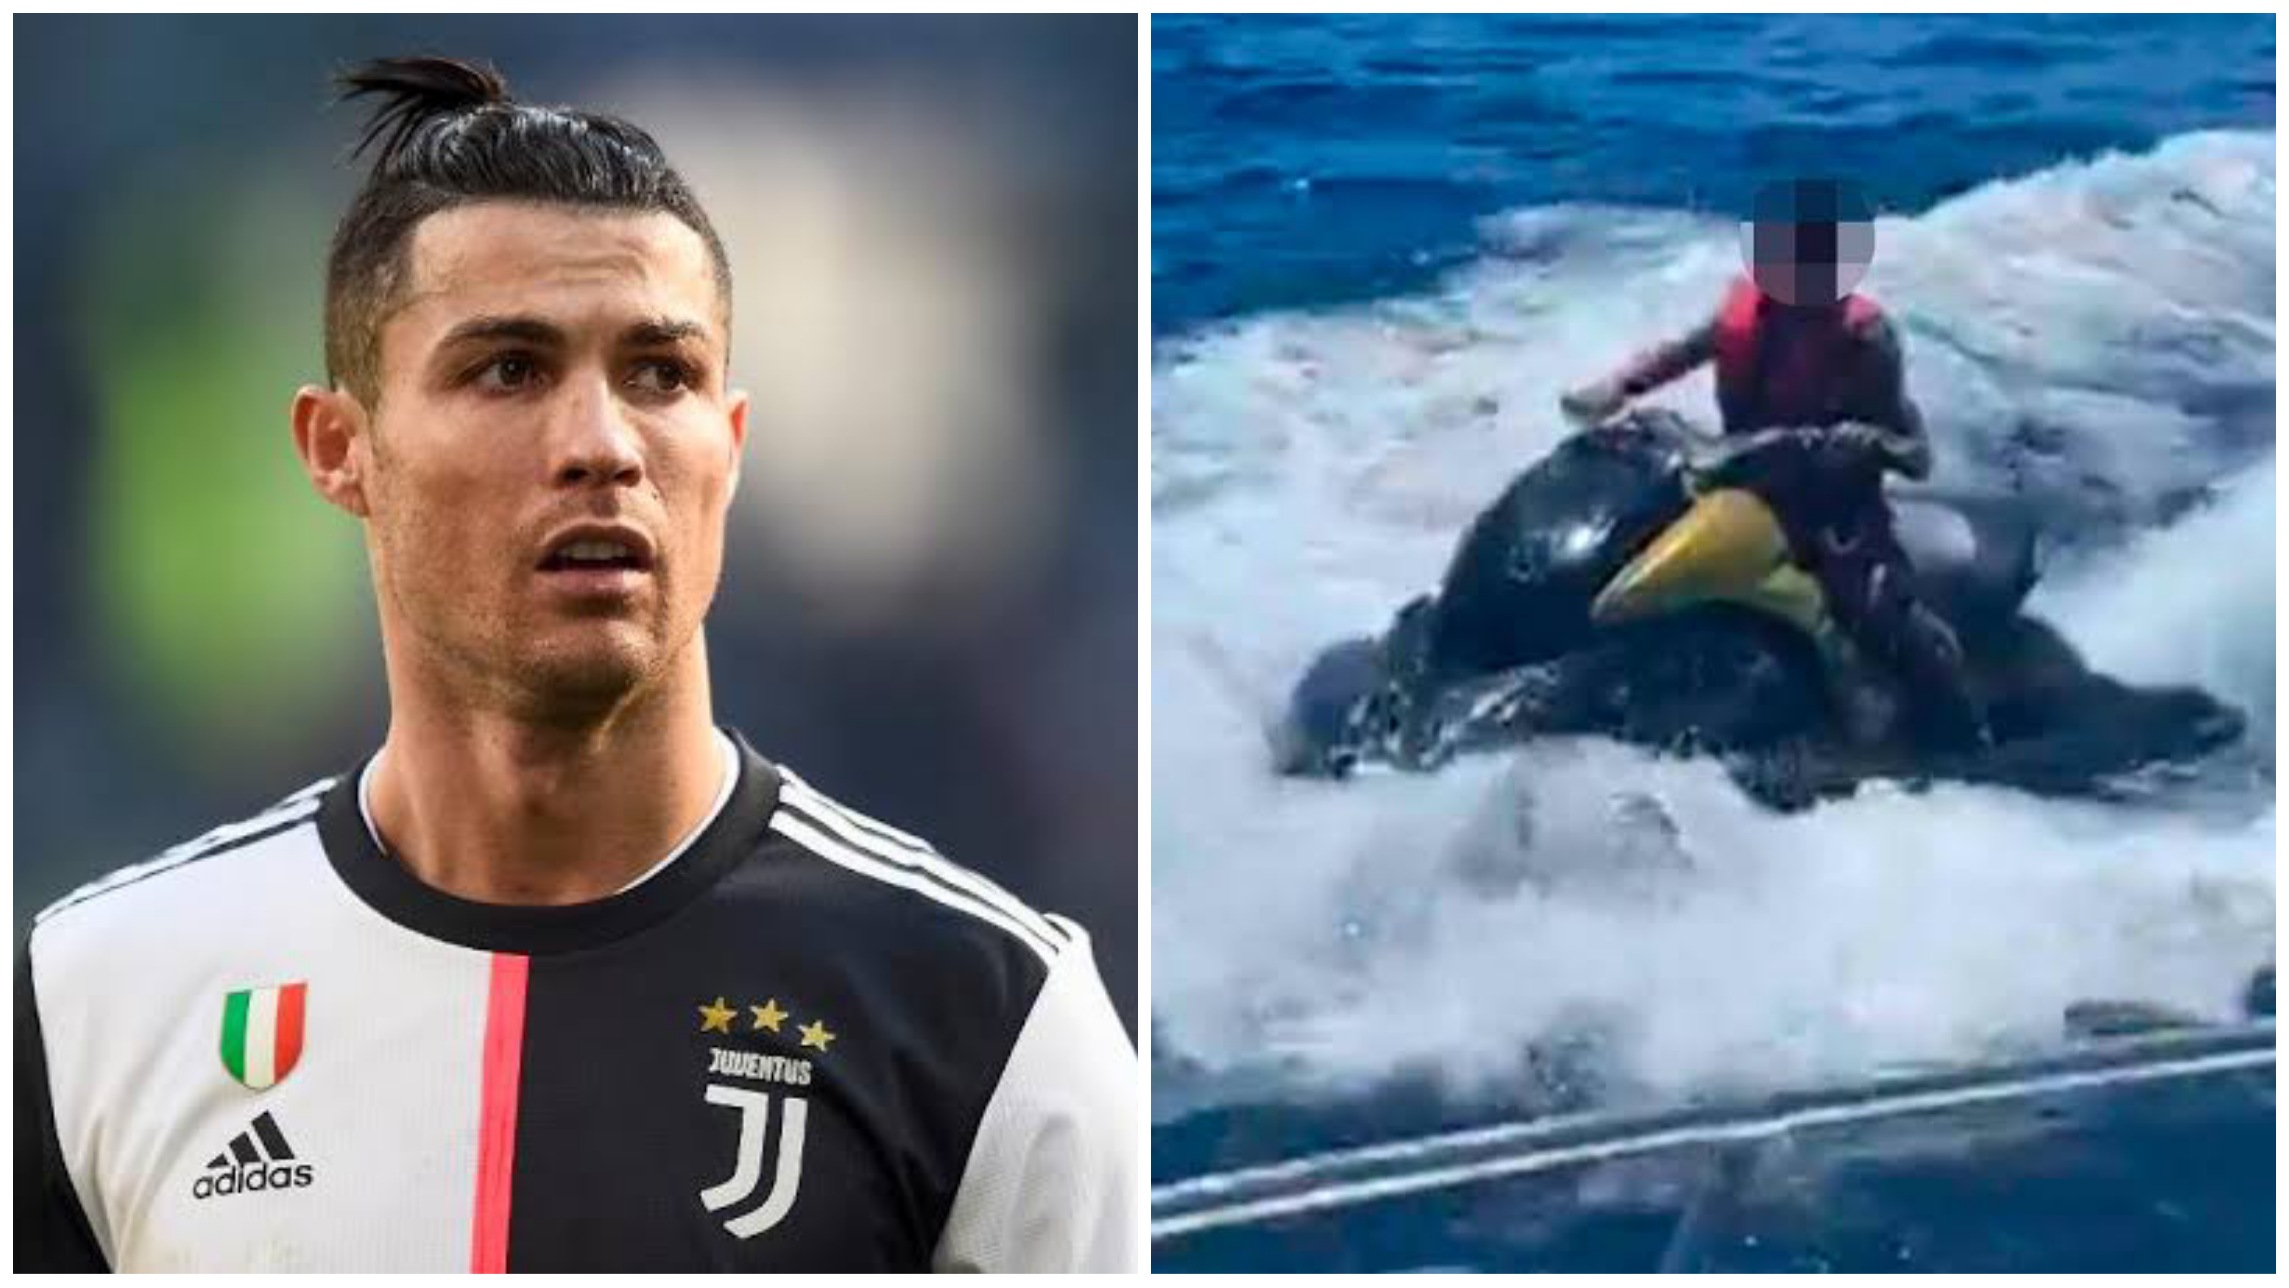 Police get involved as Cristiano Ronaldo's 10 year old son caught jet skiing alone! - THE SPORTS ROOM